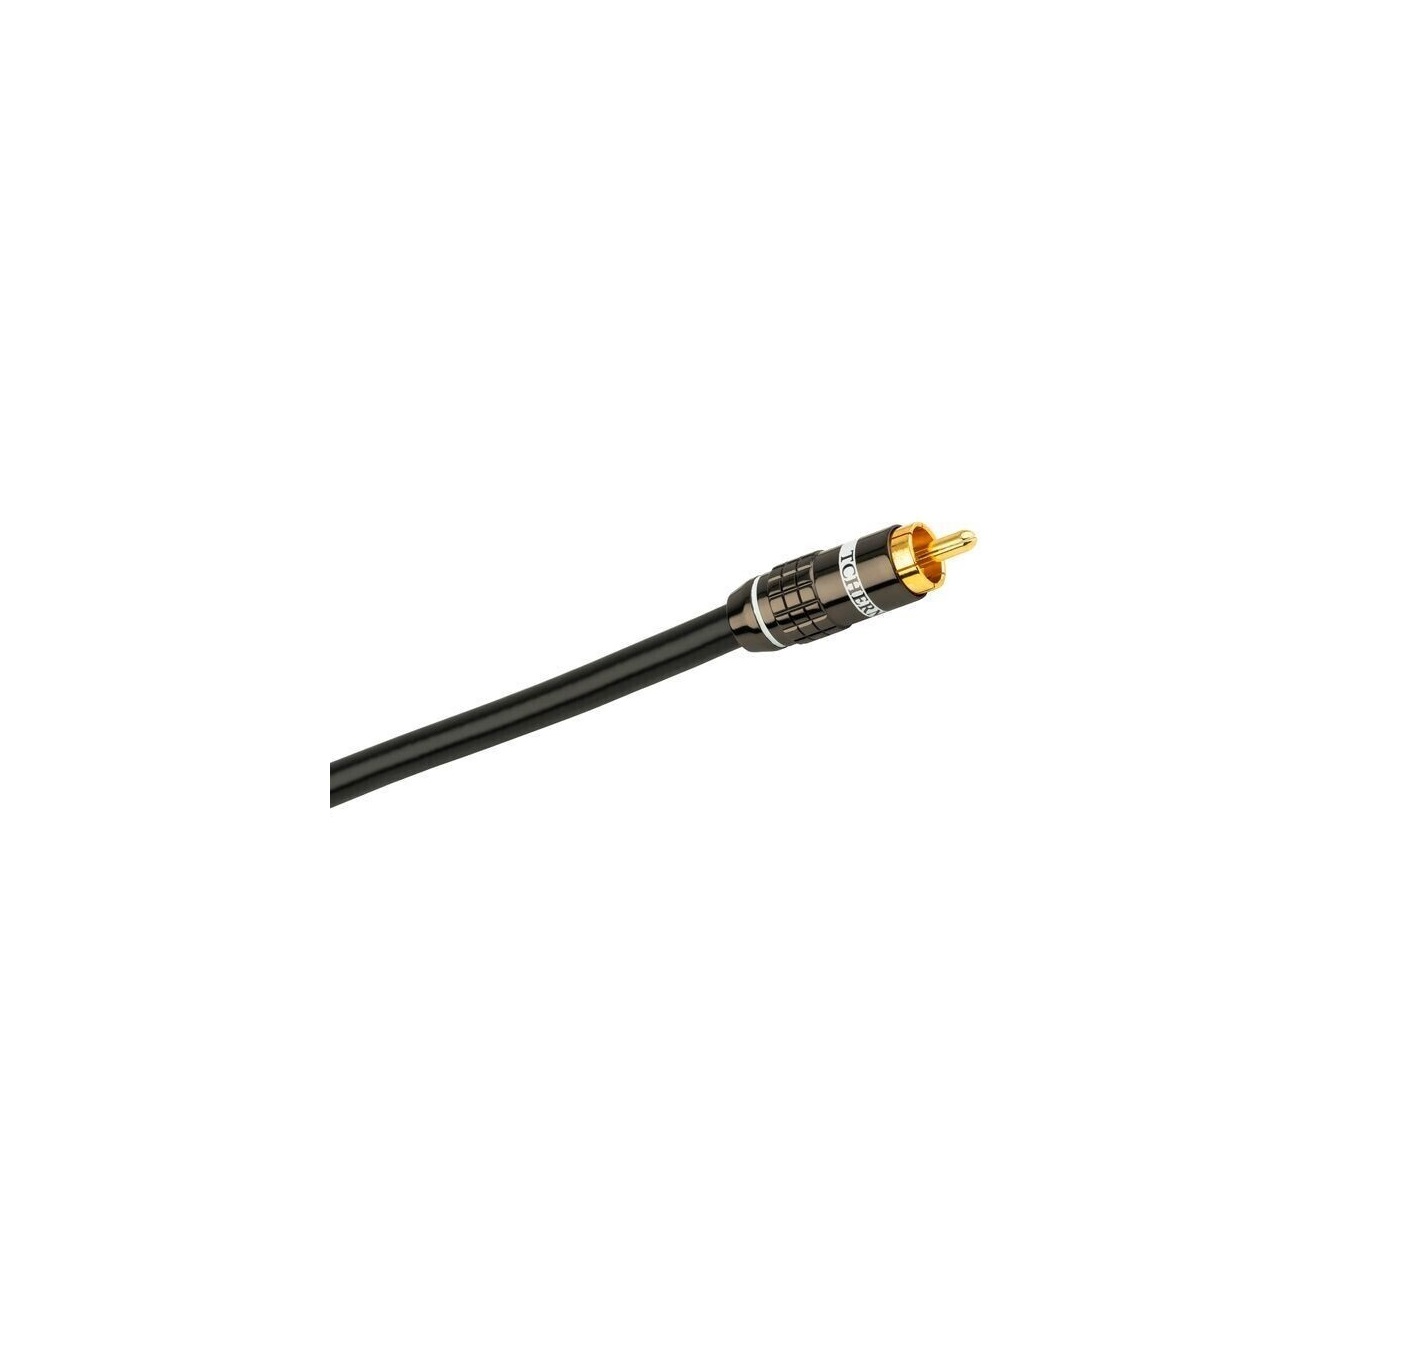 Кабели межблочные аудио Tchernov Cable Standard Balanced IC / Sub RCA (5 m) кабели межблочные аудио tchernov cable special coaxial ic digital rca s pdif 1 65m